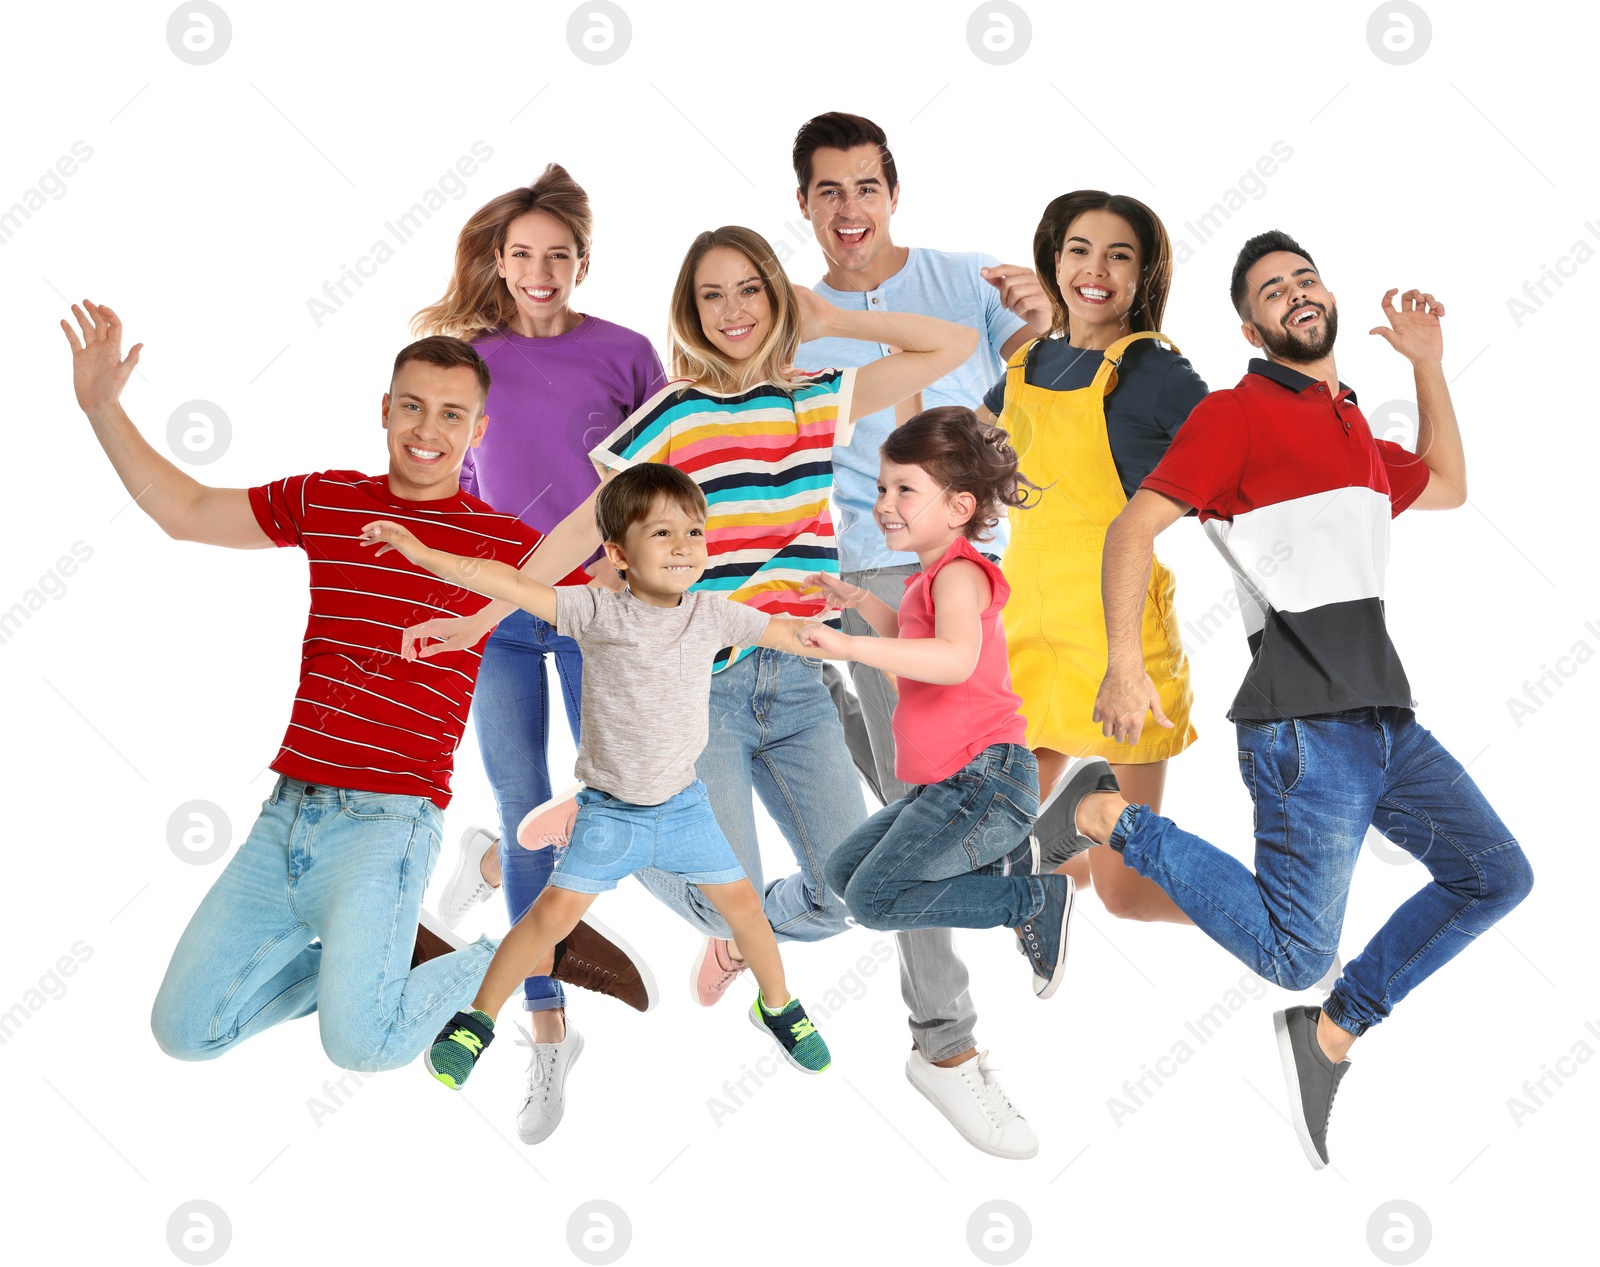 Image of Collage of emotional people jumping on white background